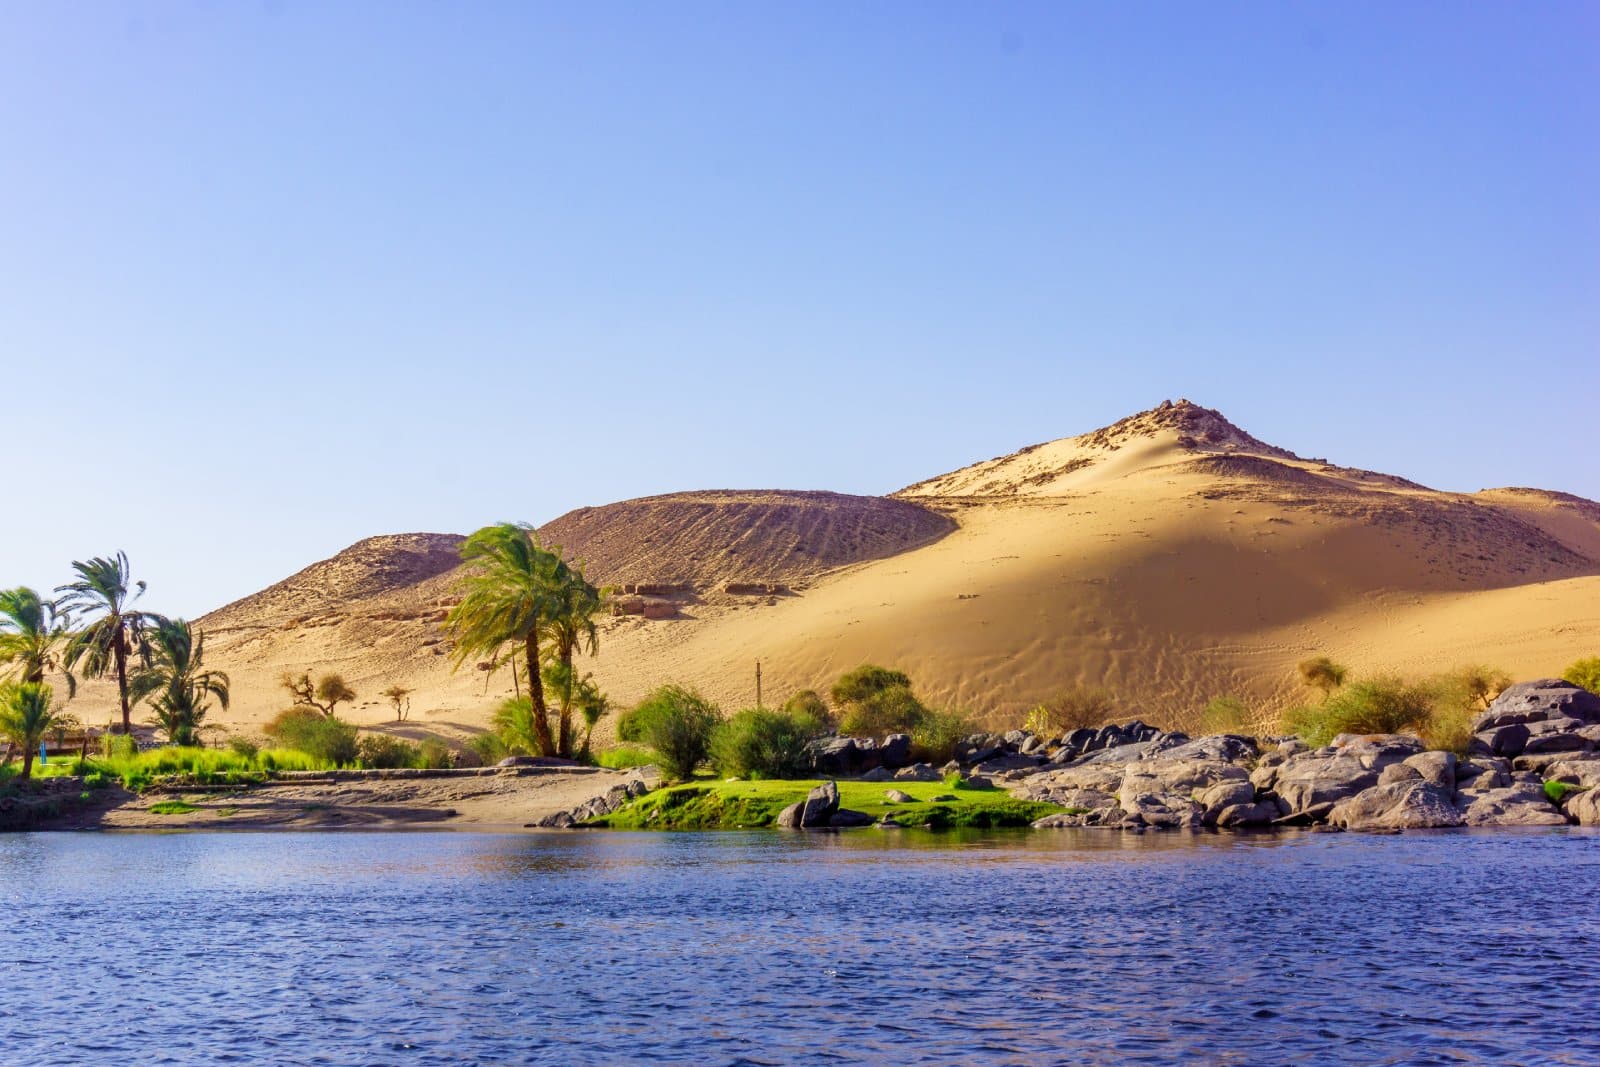 <p class="wp-caption-text">Image Credit: Shutterstock / Ewa Studio</p>  <p><span>The Nile Delta, stretching from Cairo to the Mediterranean Sea, is a region of rich agricultural land, ancient cities, and a network of waterways. It offers a glimpse into rural Egyptian life and the country’s ancient and Islamic heritage, with cities like Rosetta and Mansoura.</span></p>